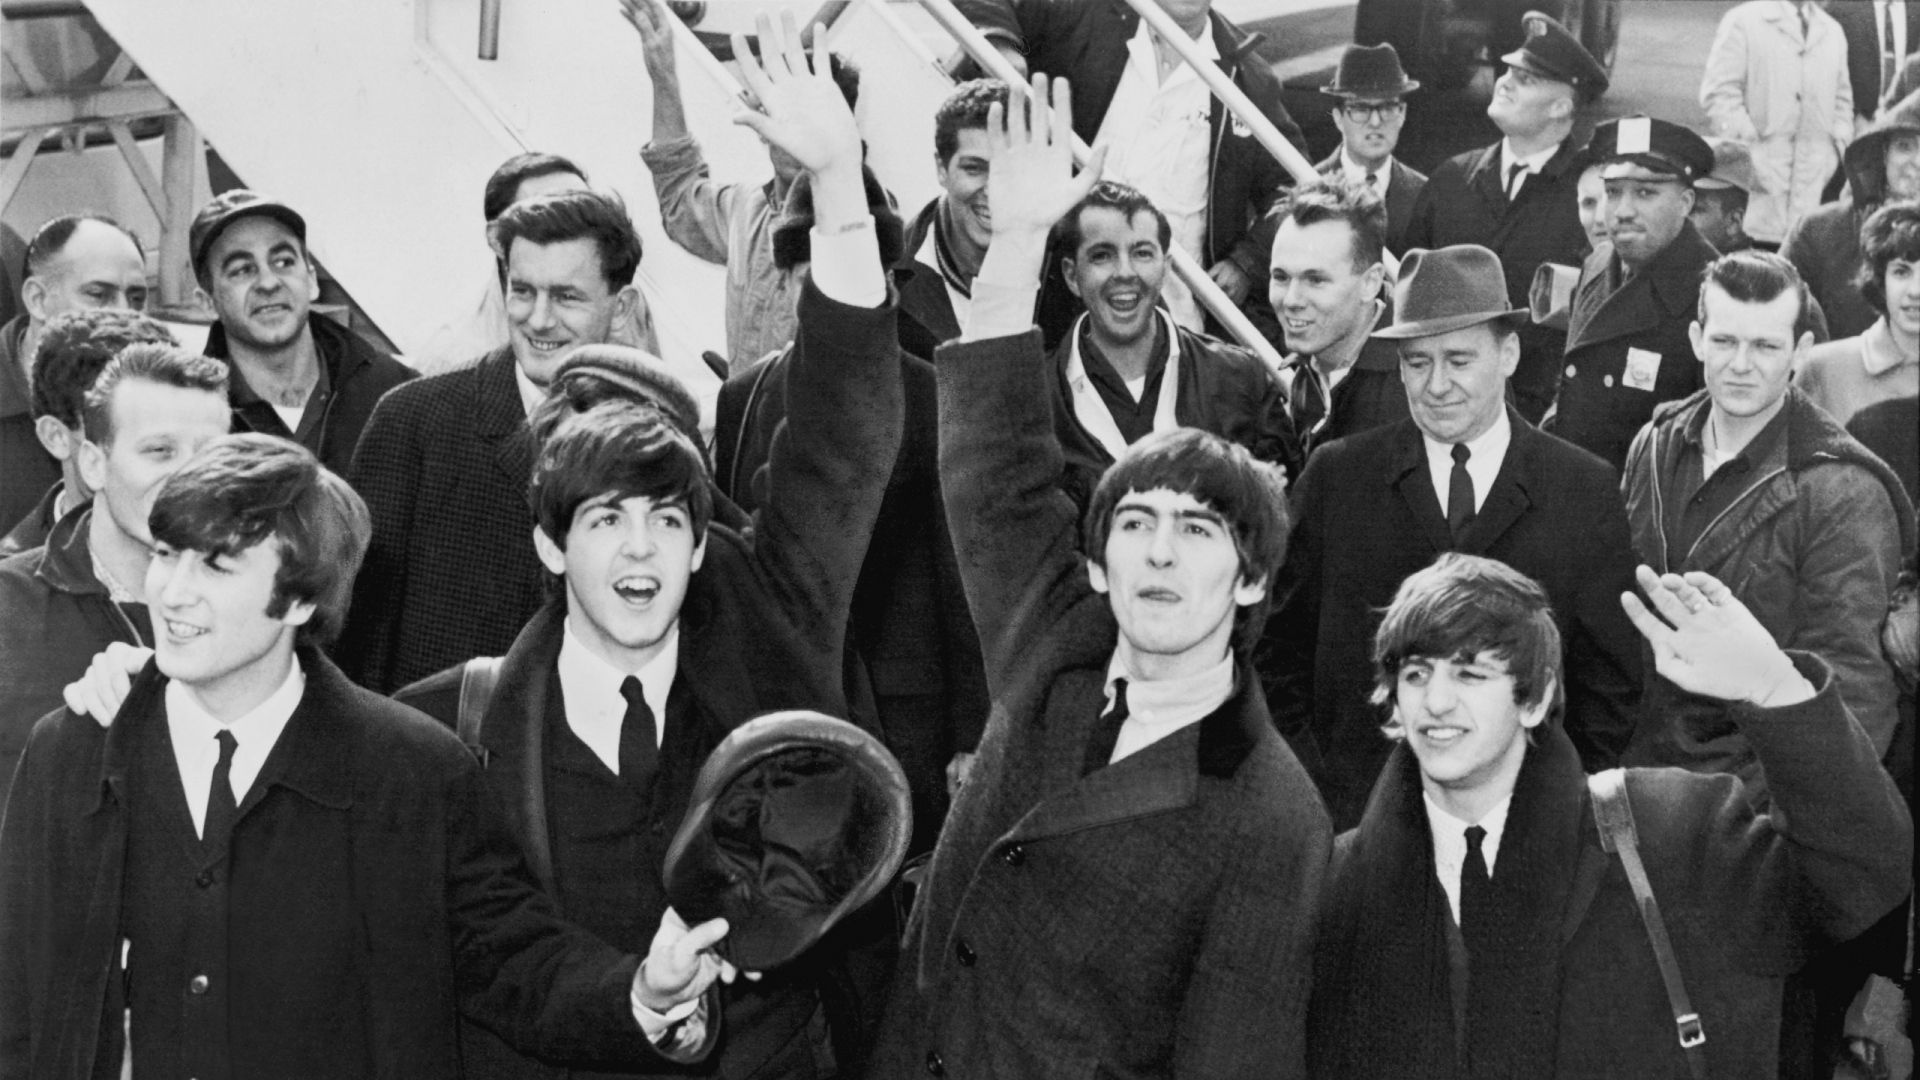 Download Wallpaper 1920x1080 The beatles, Band, Members, Suits ...